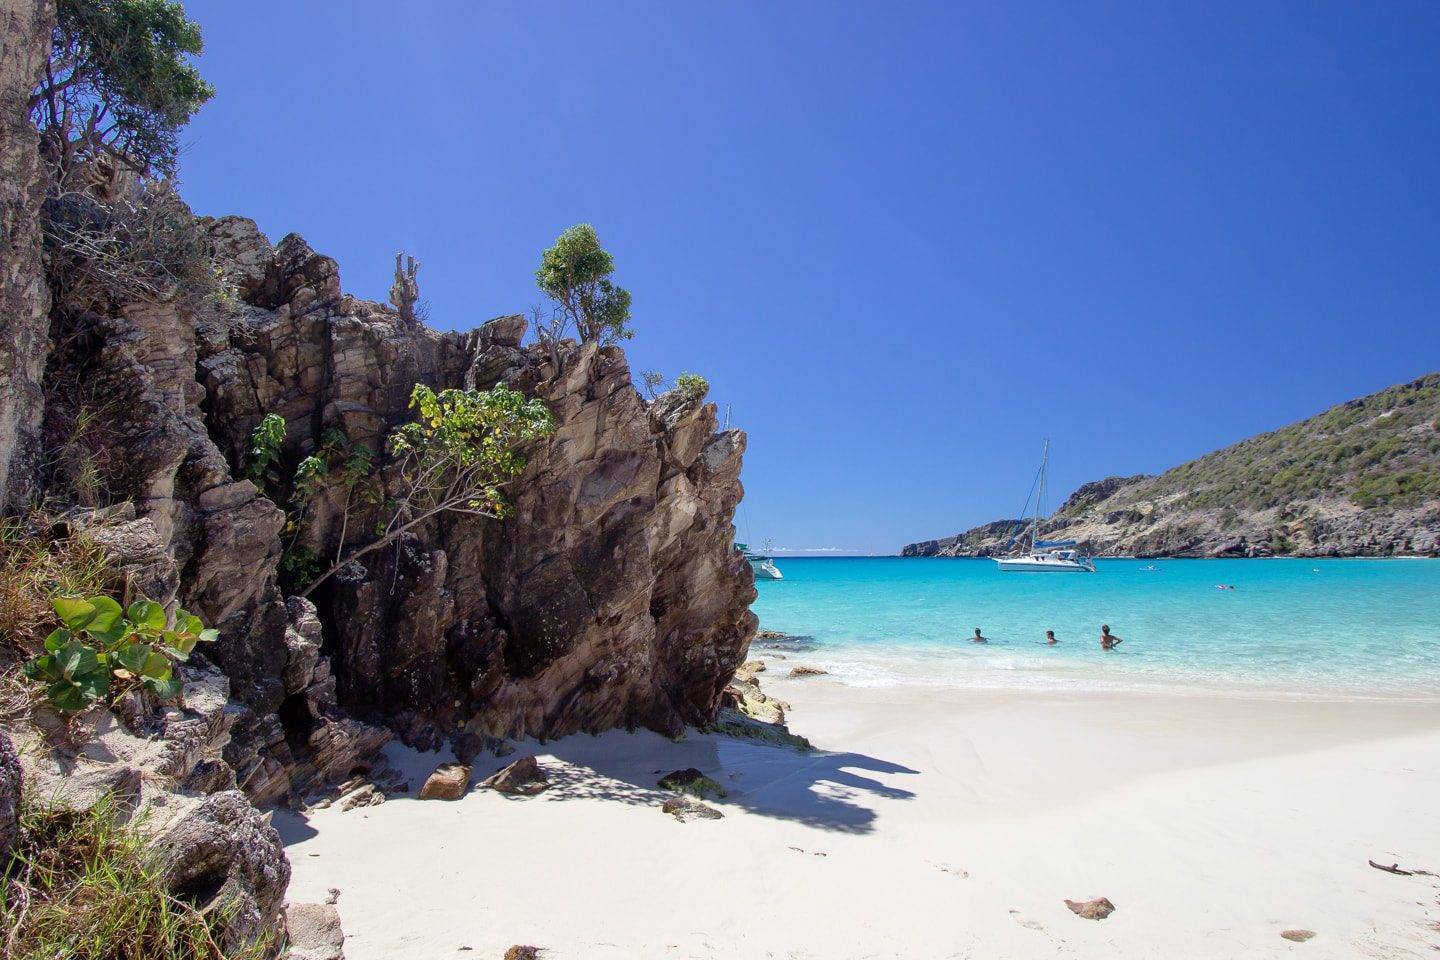 The 6 best beaches in St. Barts